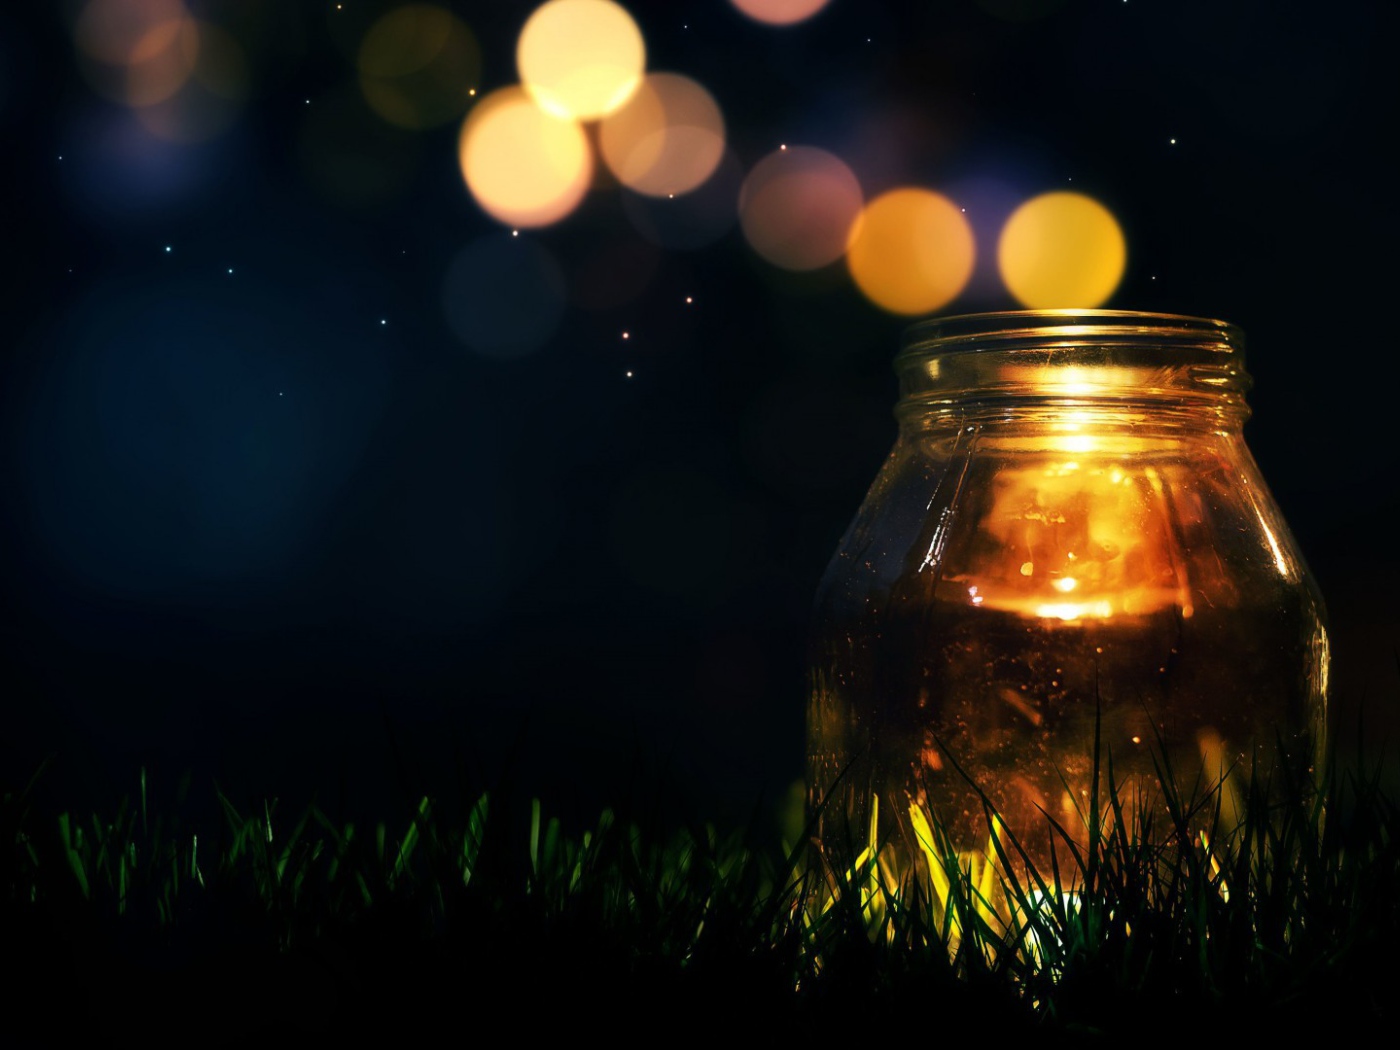 Glass jar on the grass at night